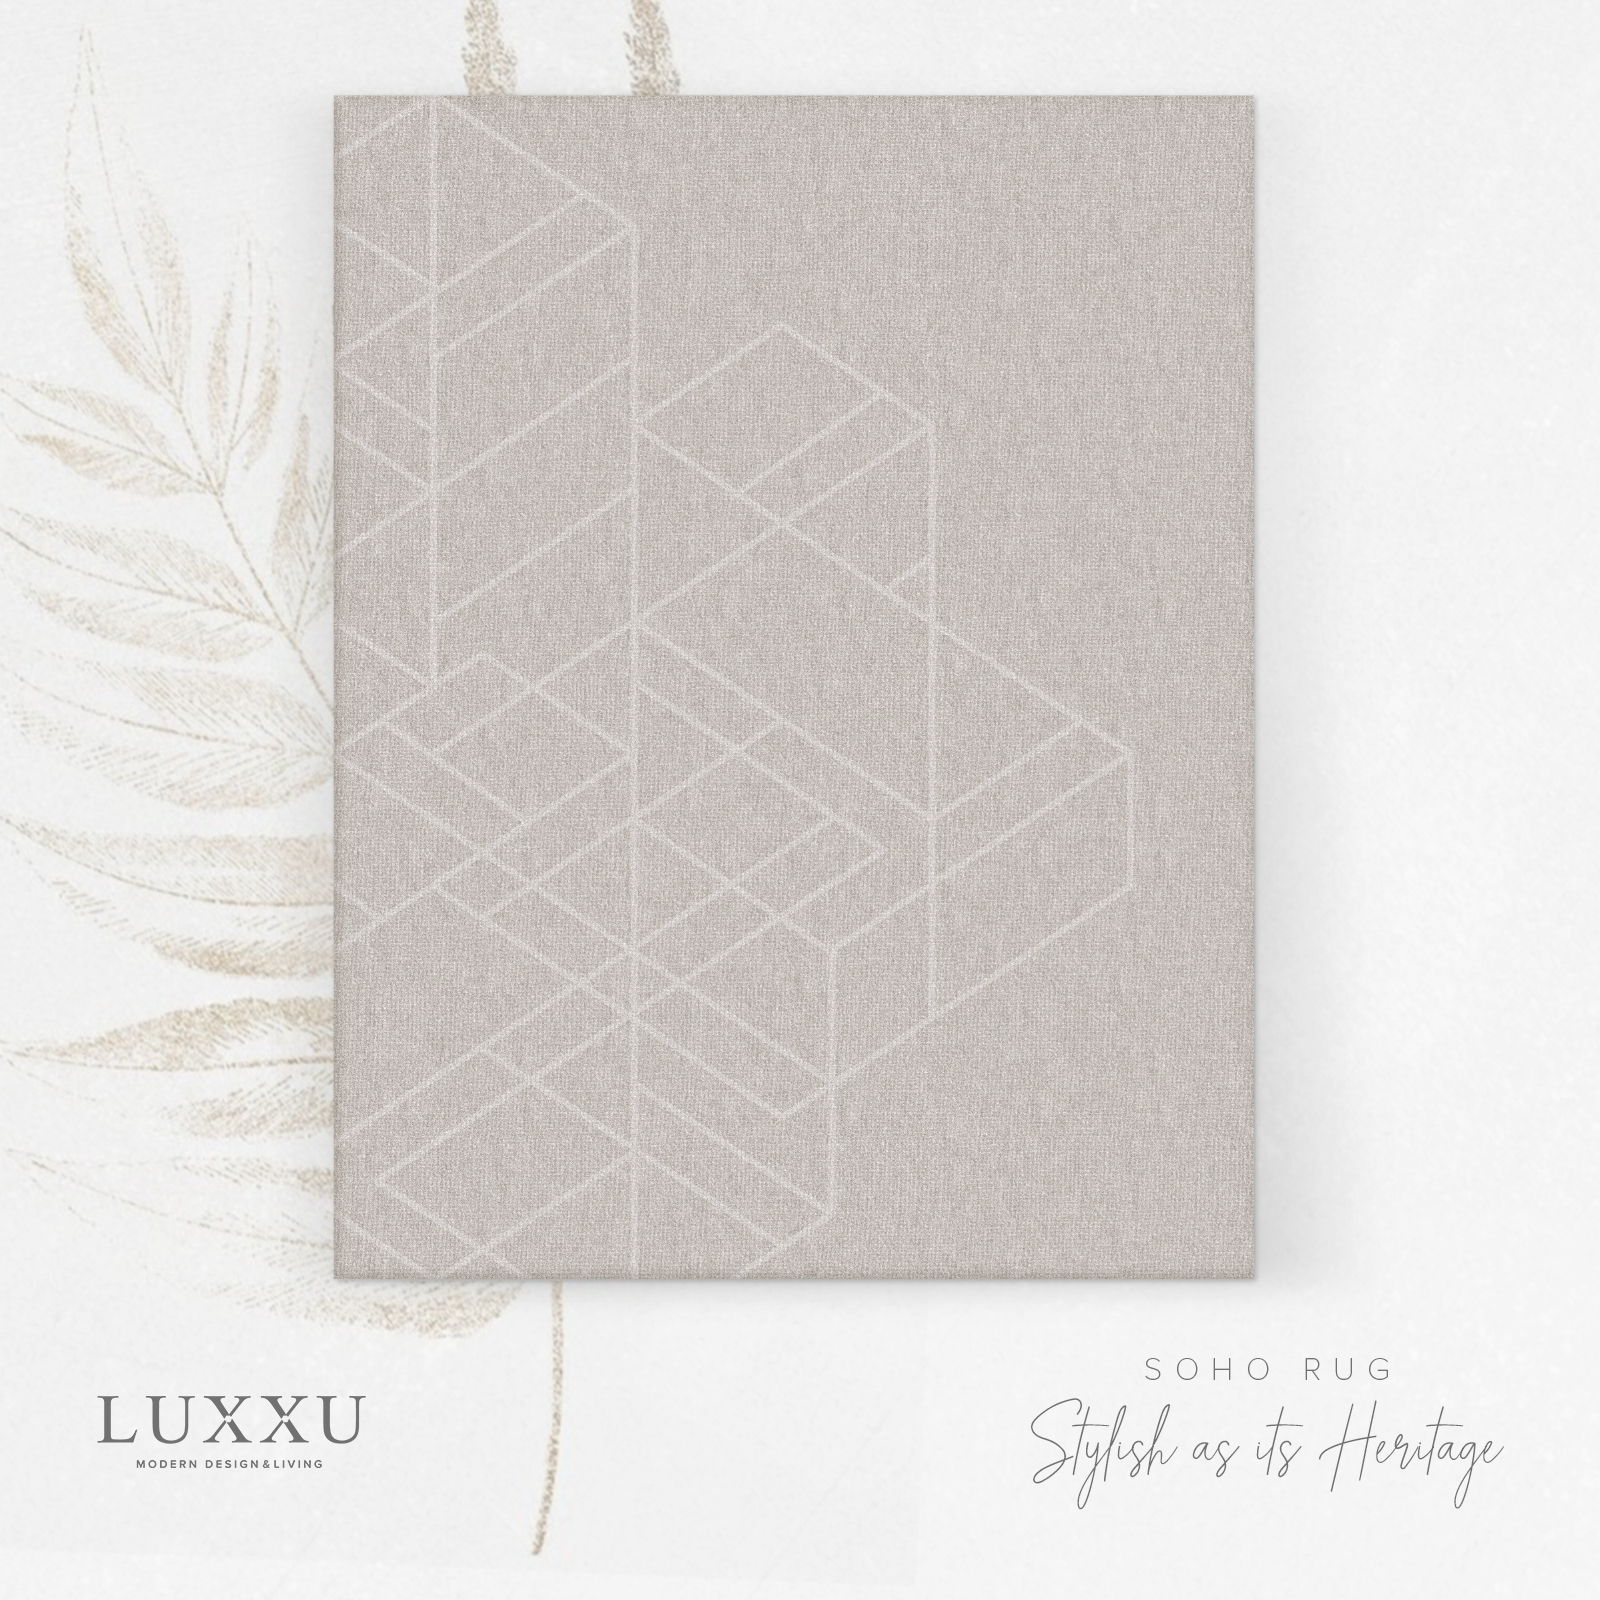 New Rug Collection - LUXXU's Way Of Crafting Innovation!